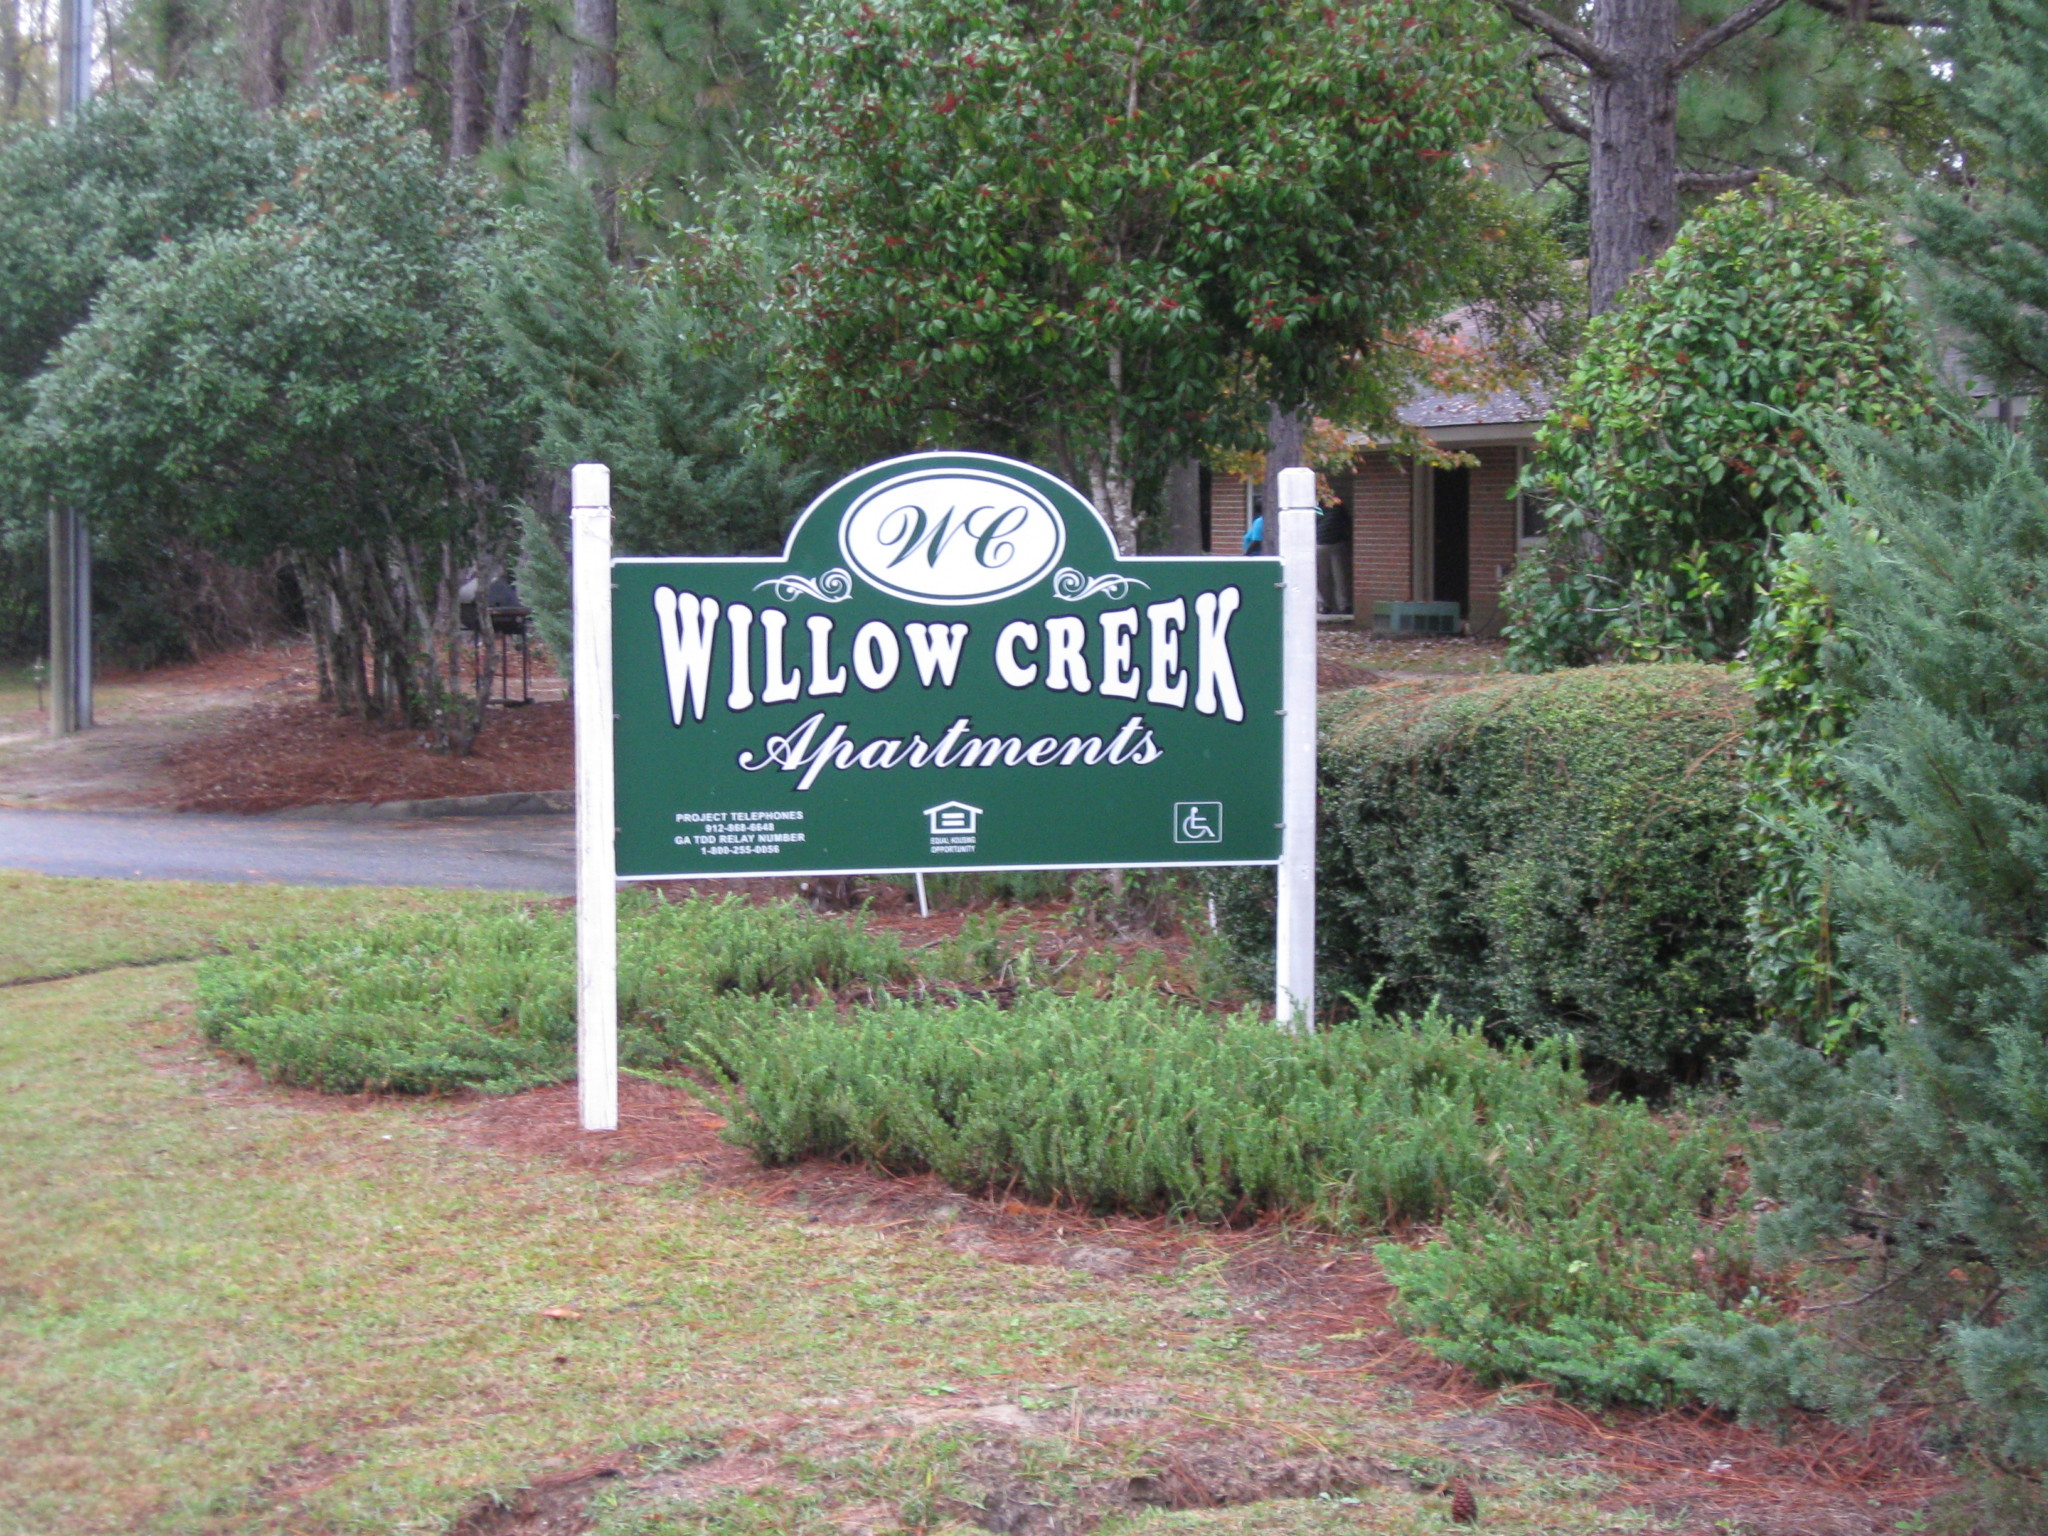 WILLOW CREEK APARTMENTS